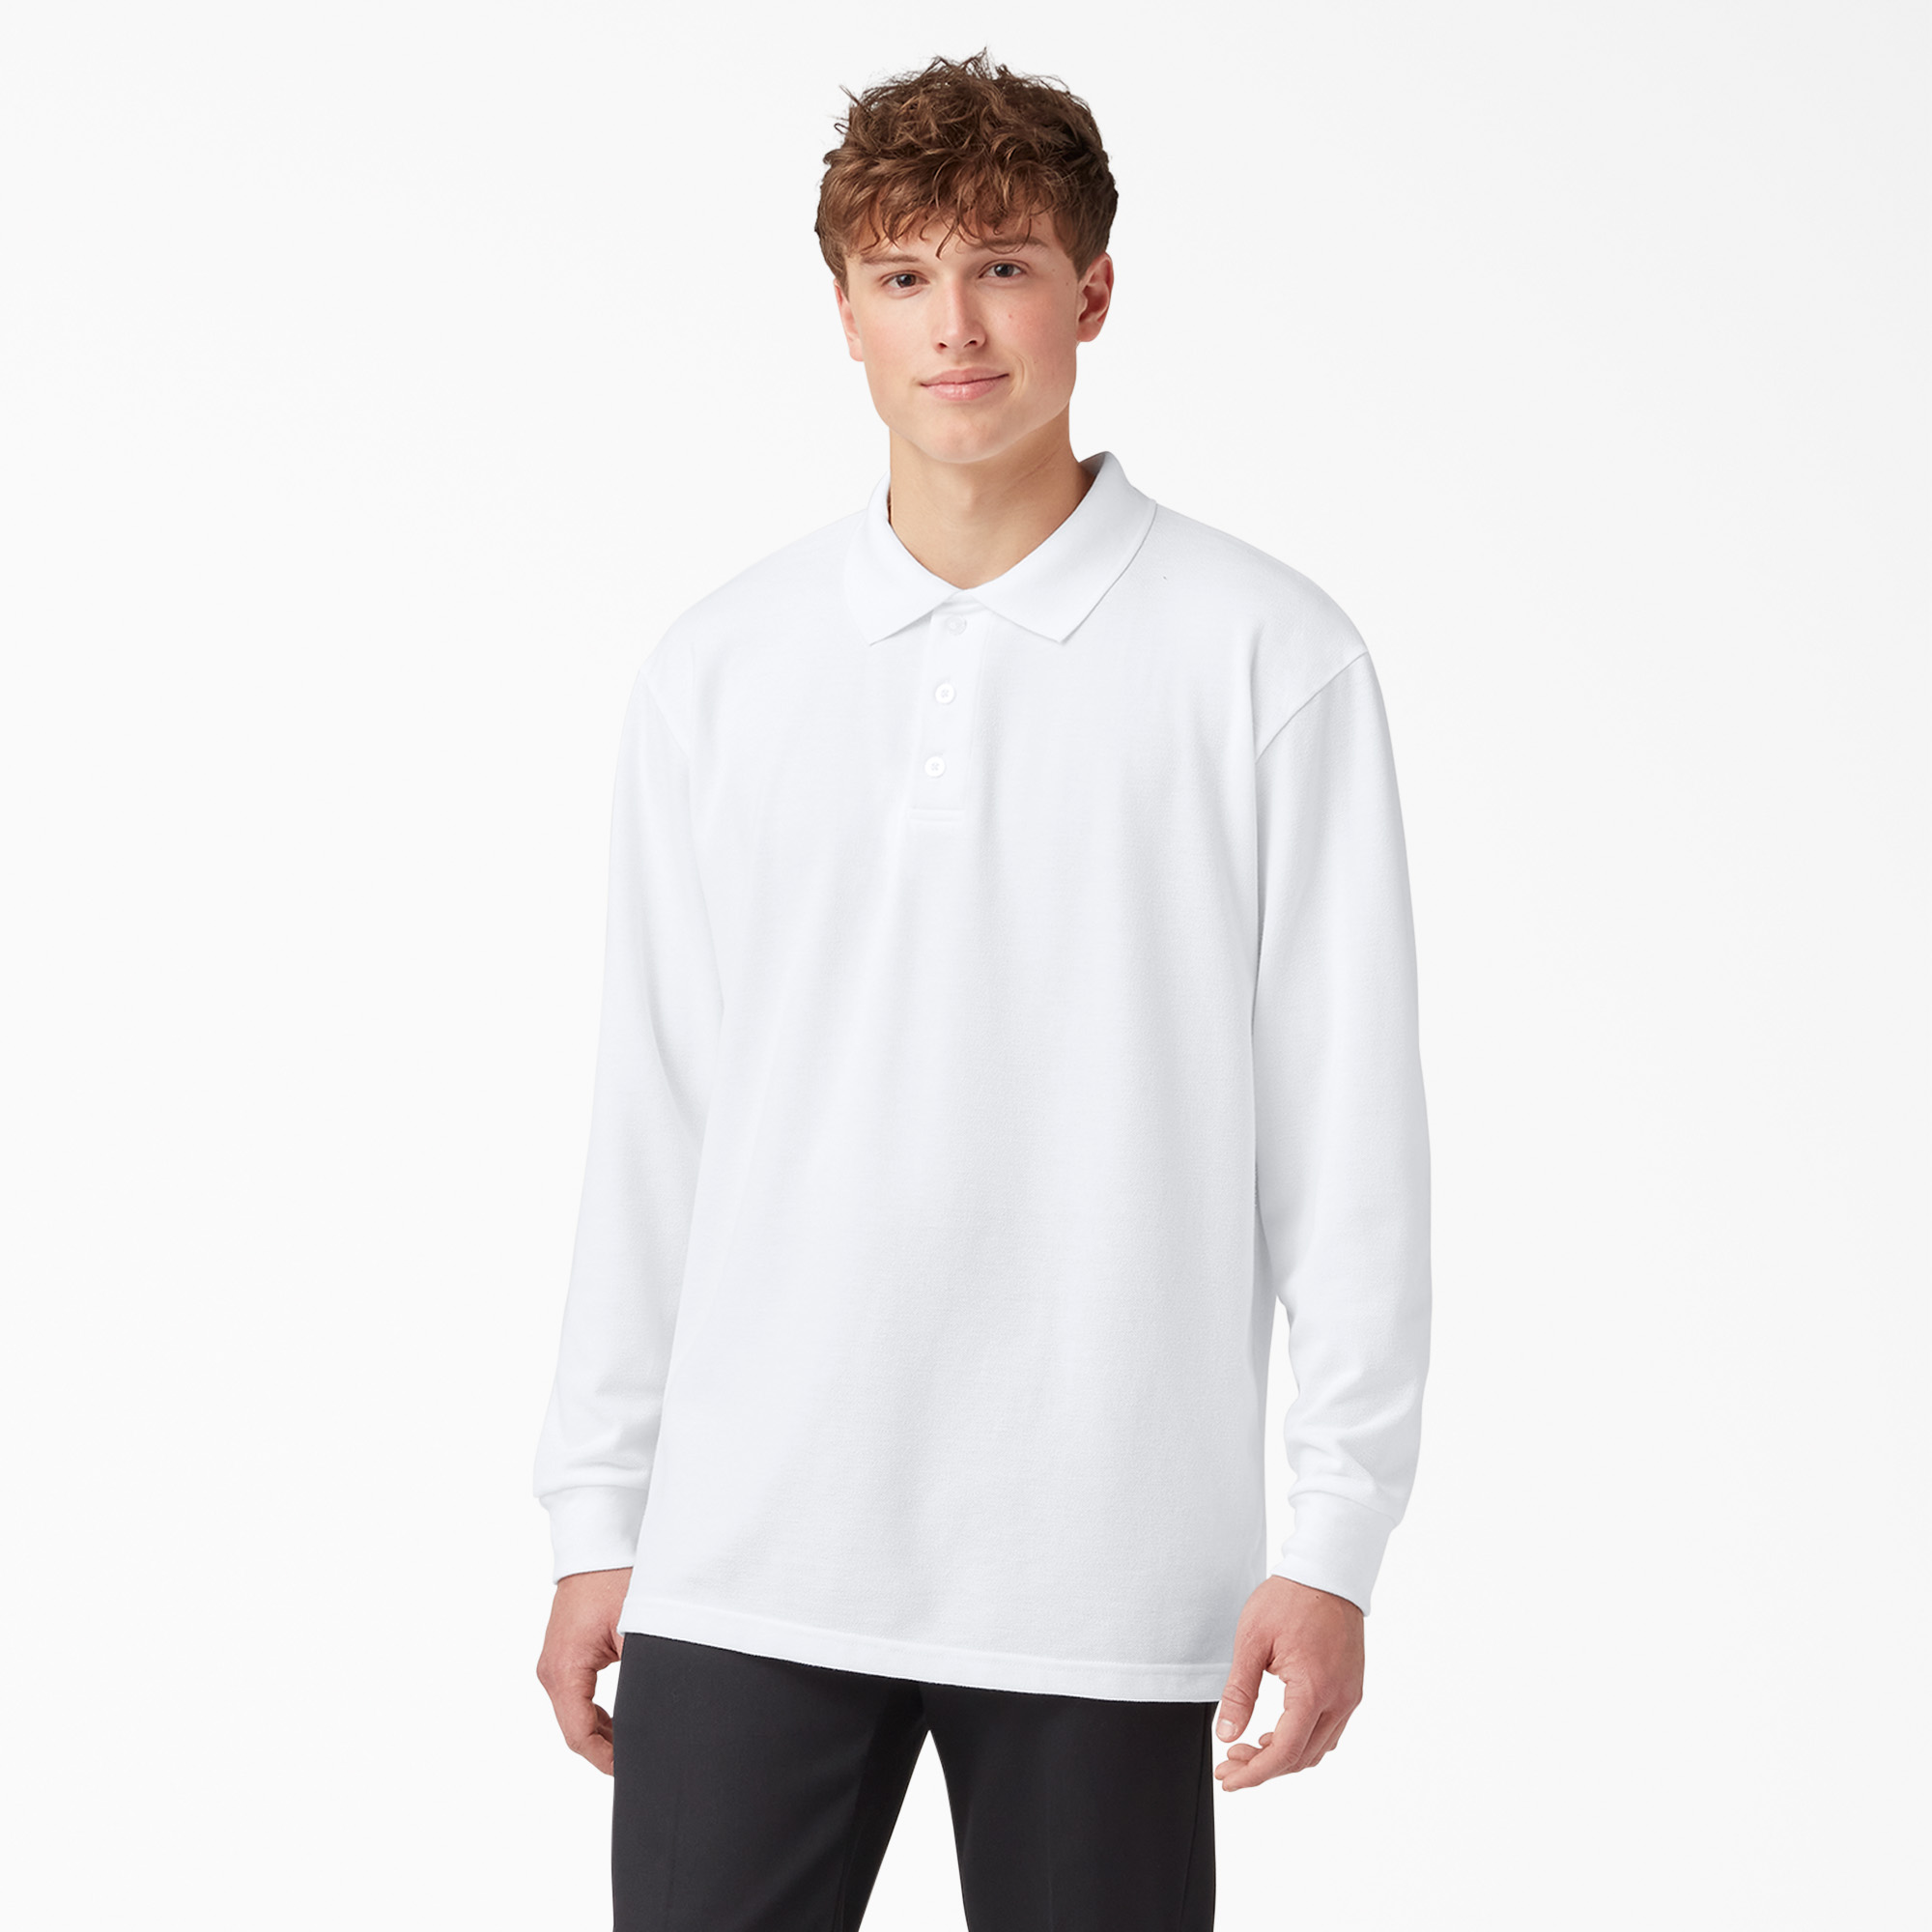 Adult Sized Long Sleeve Piqué Polo Shirt - White (WH)